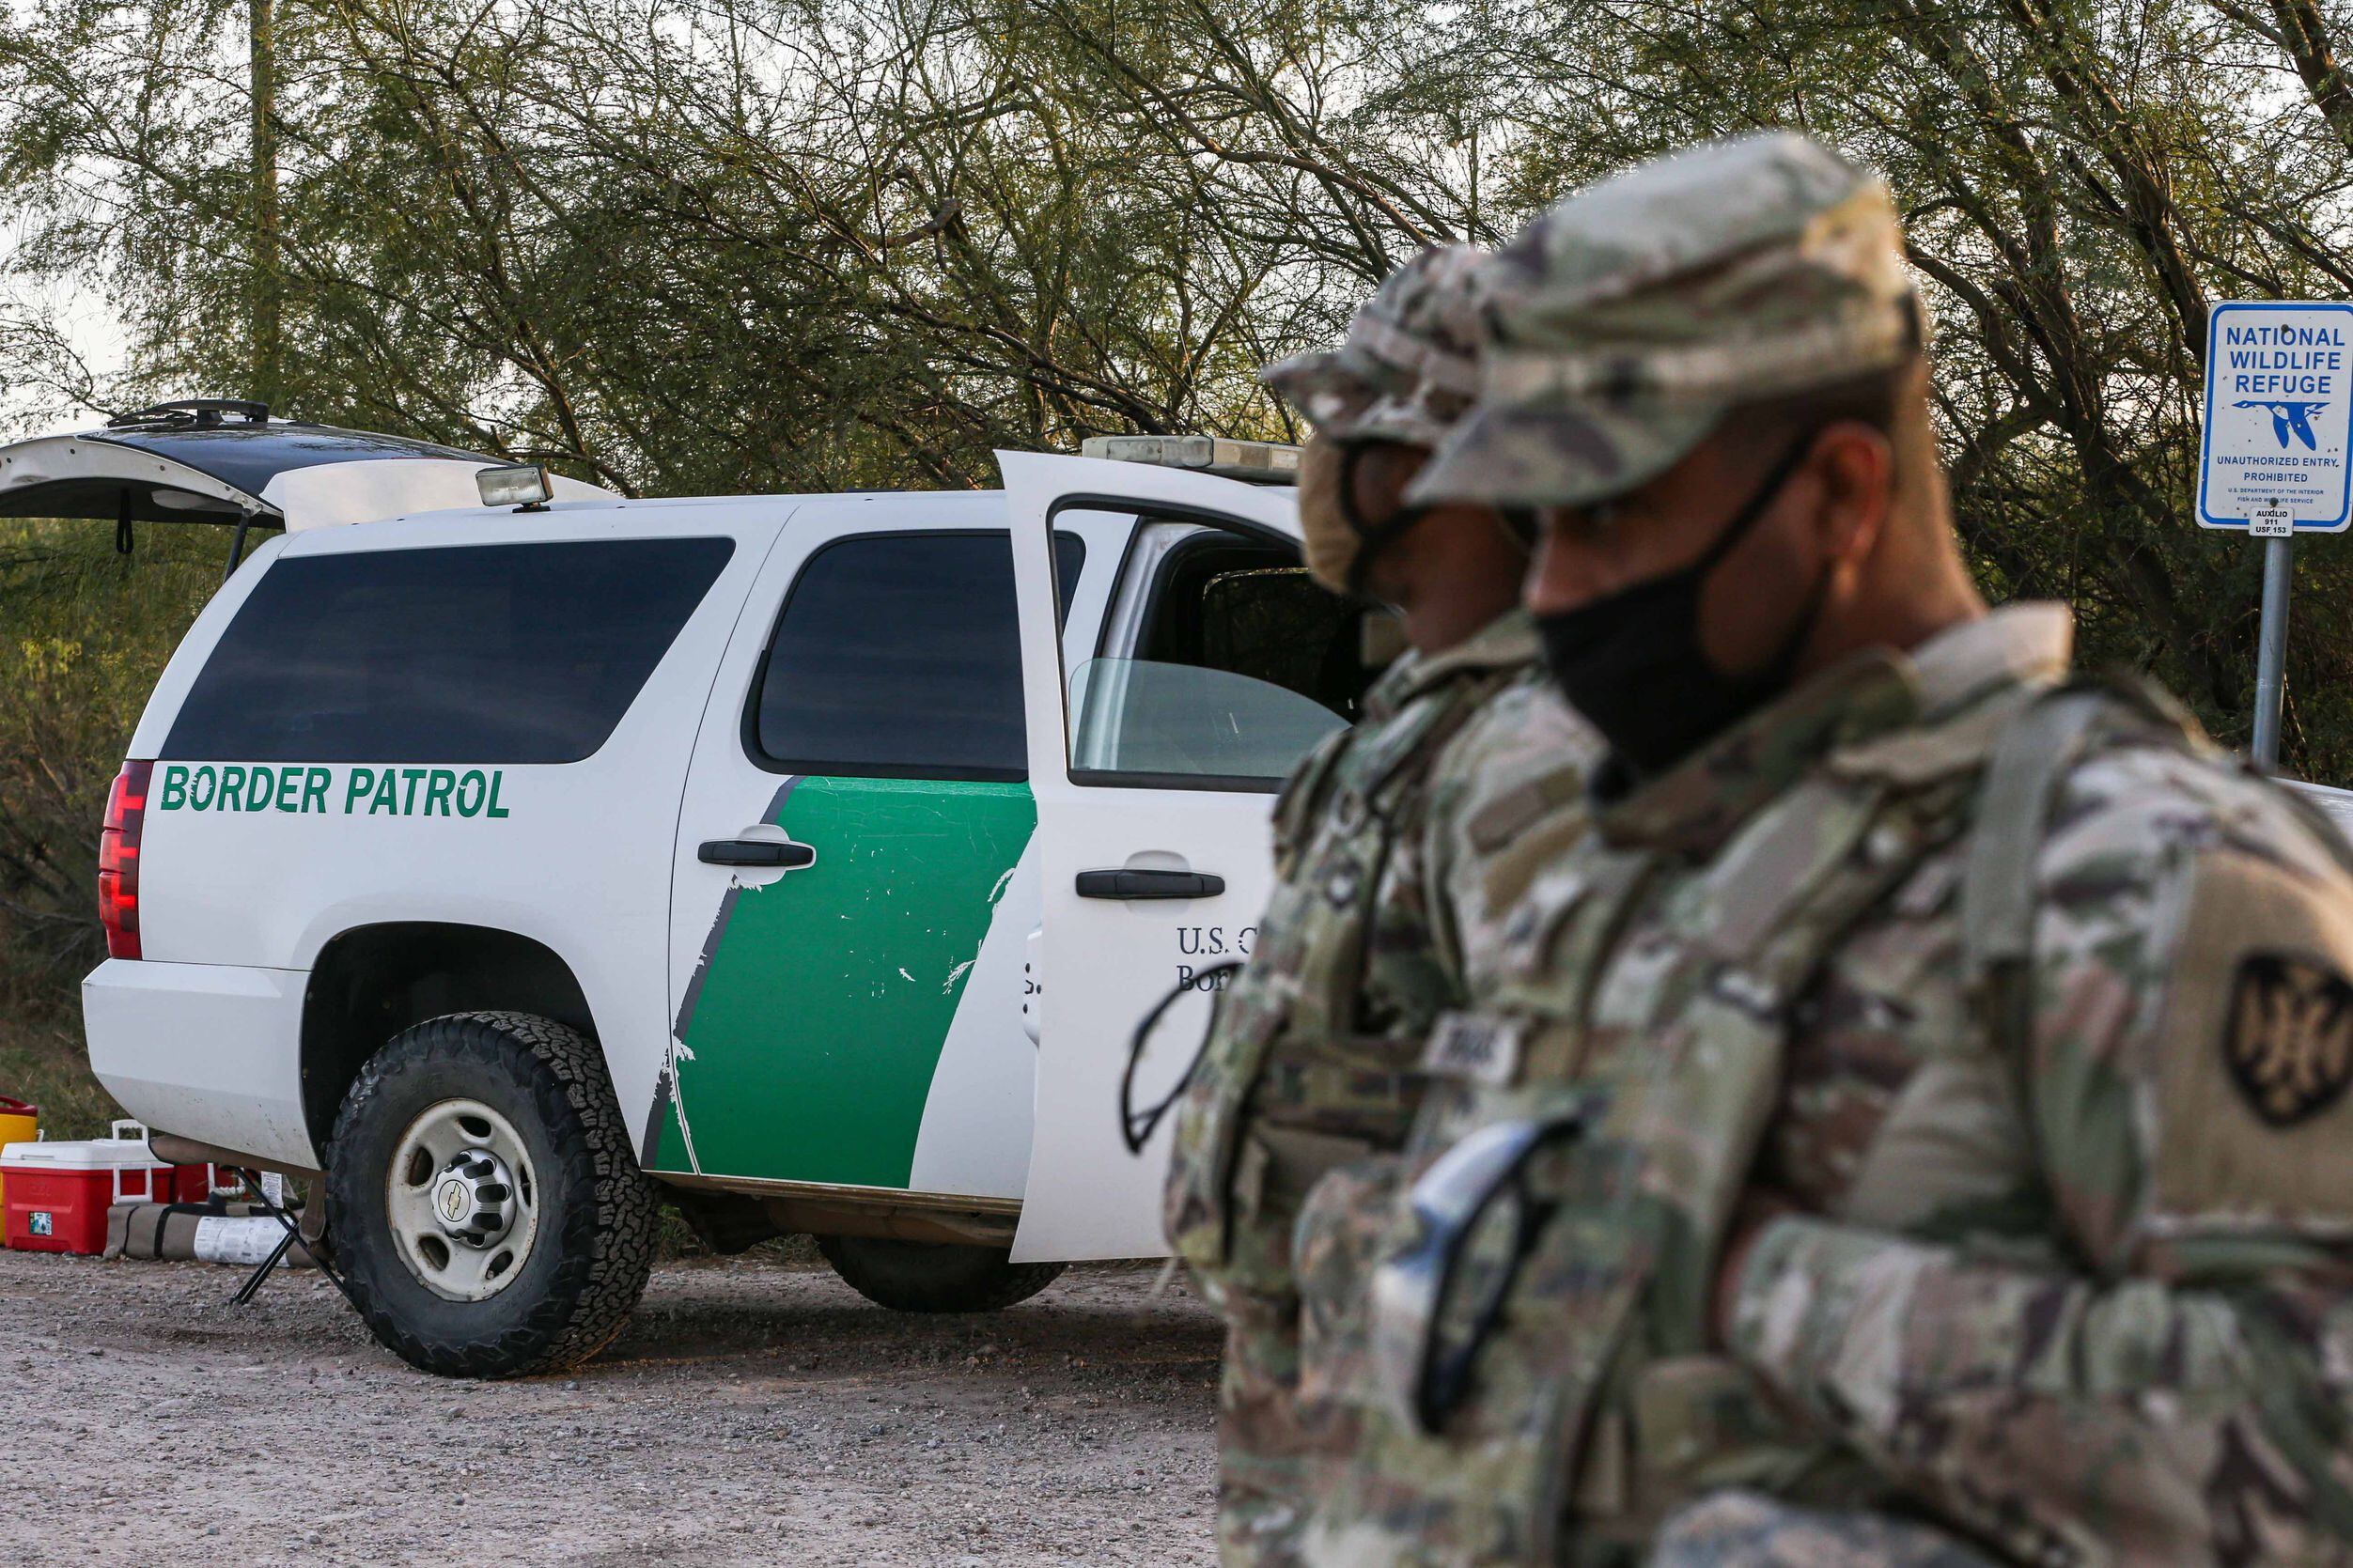 In the Rio Grande Valley, the Border Patrol Is the 'Go-To Job